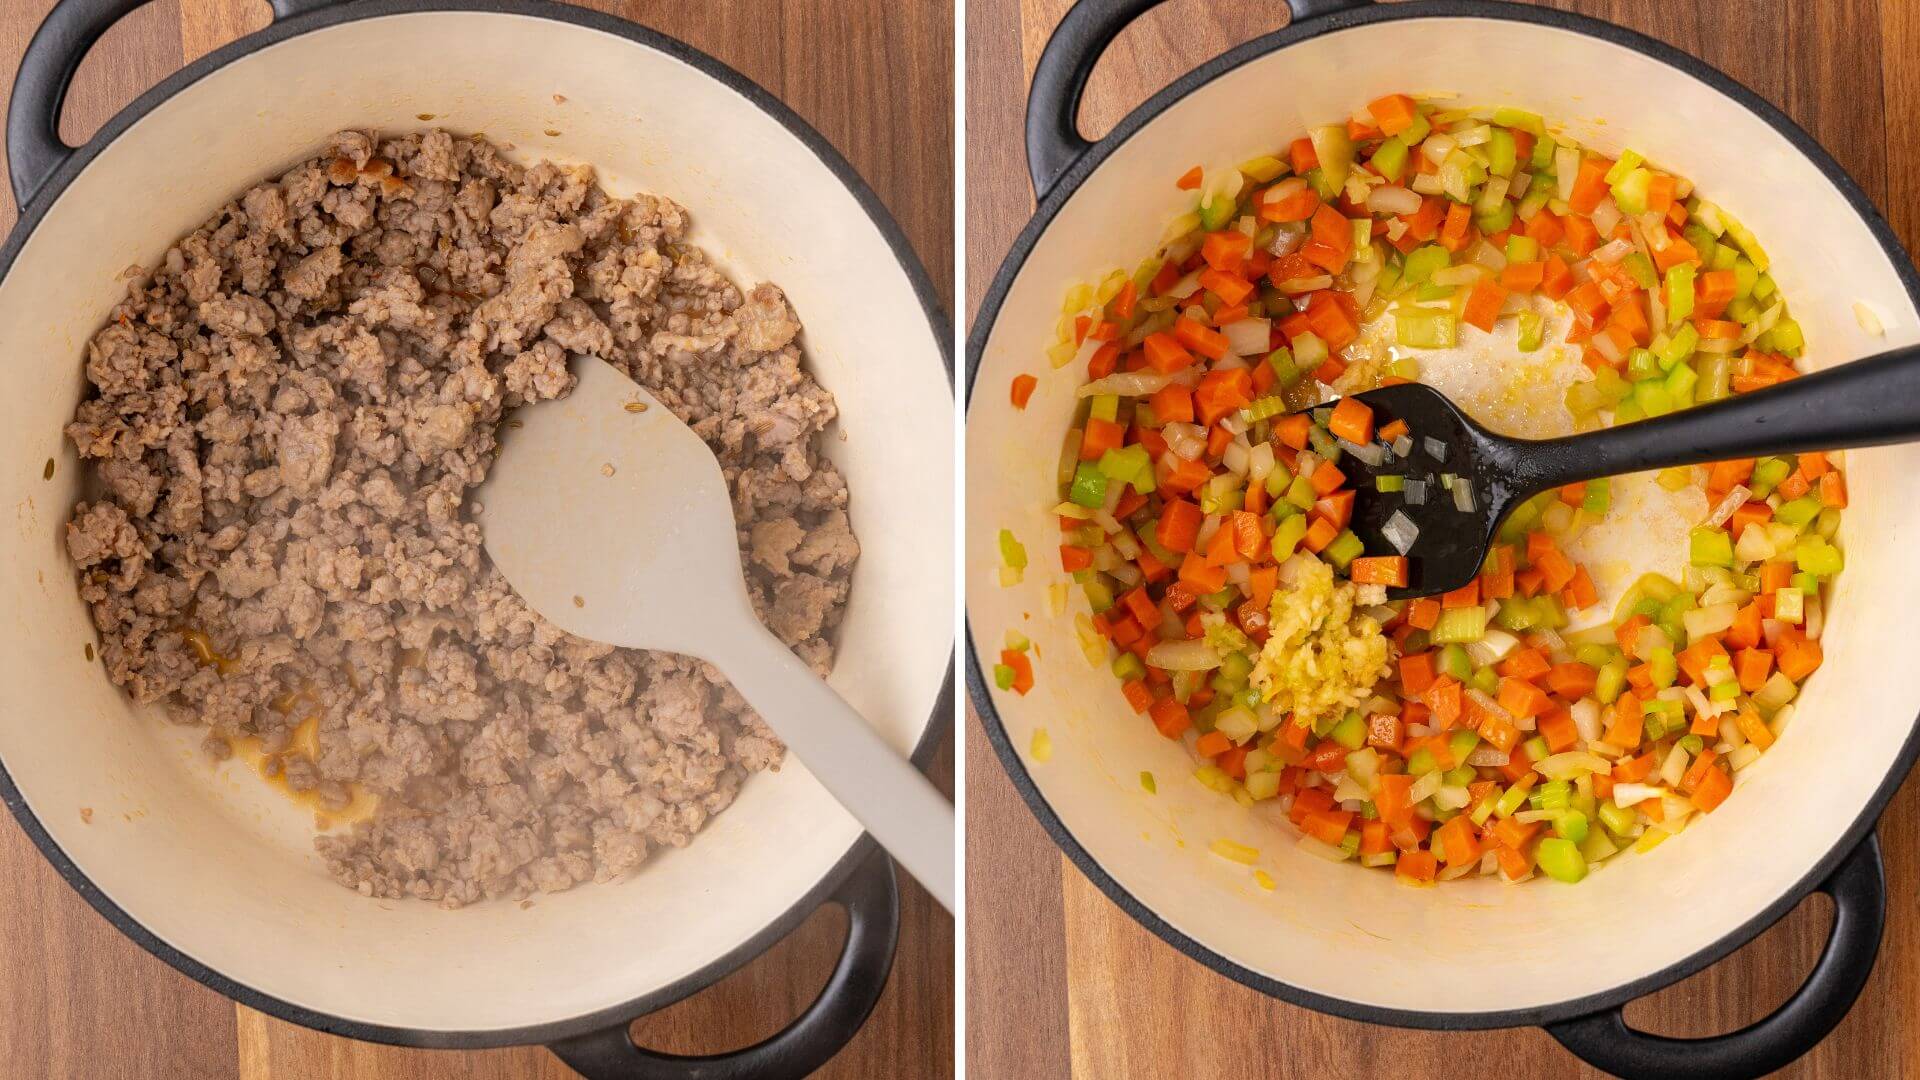 On the left, ground beef is browned and then drained in the stockpot. On the right, the beef has been removed and the veggies are softened with olive oil.